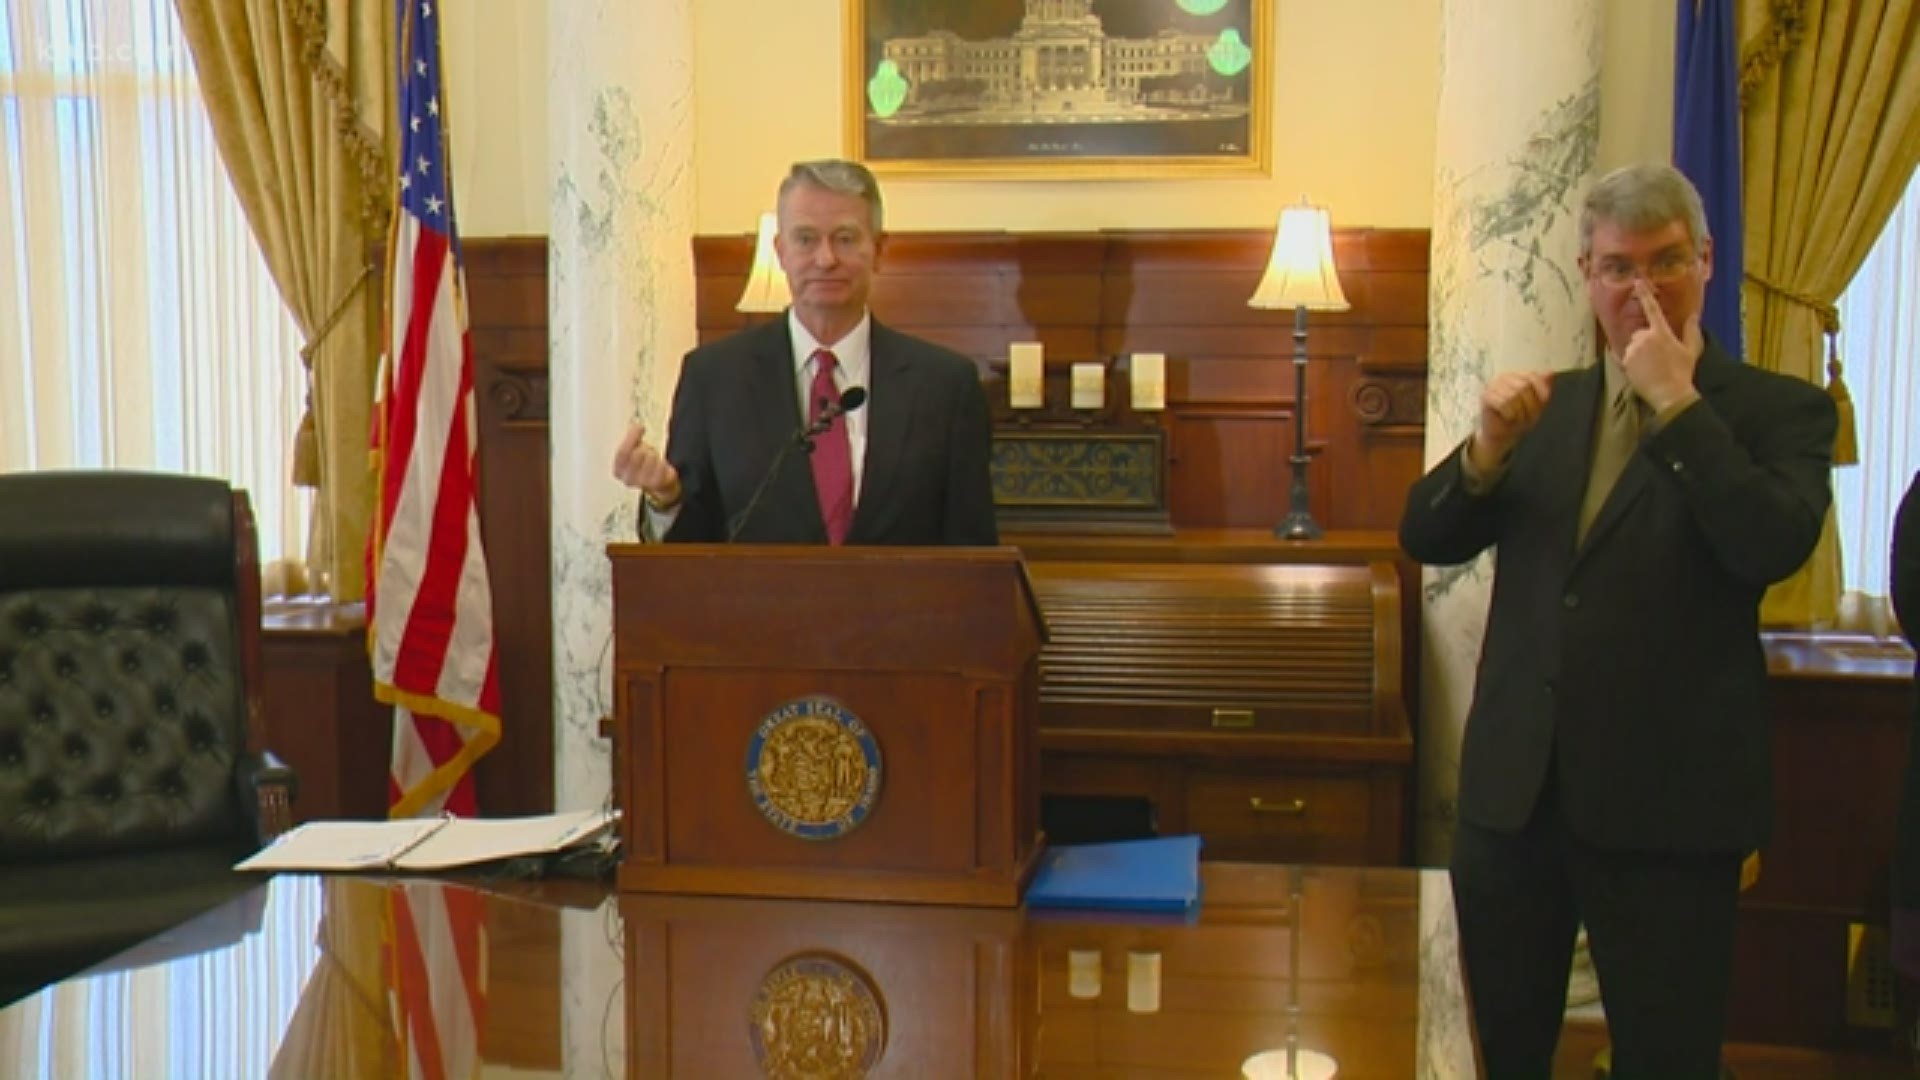 Idaho Governor Brad Little held a press conference Wednesday to speak about coronavirus preparations underway for the "issue right on our doorstep."